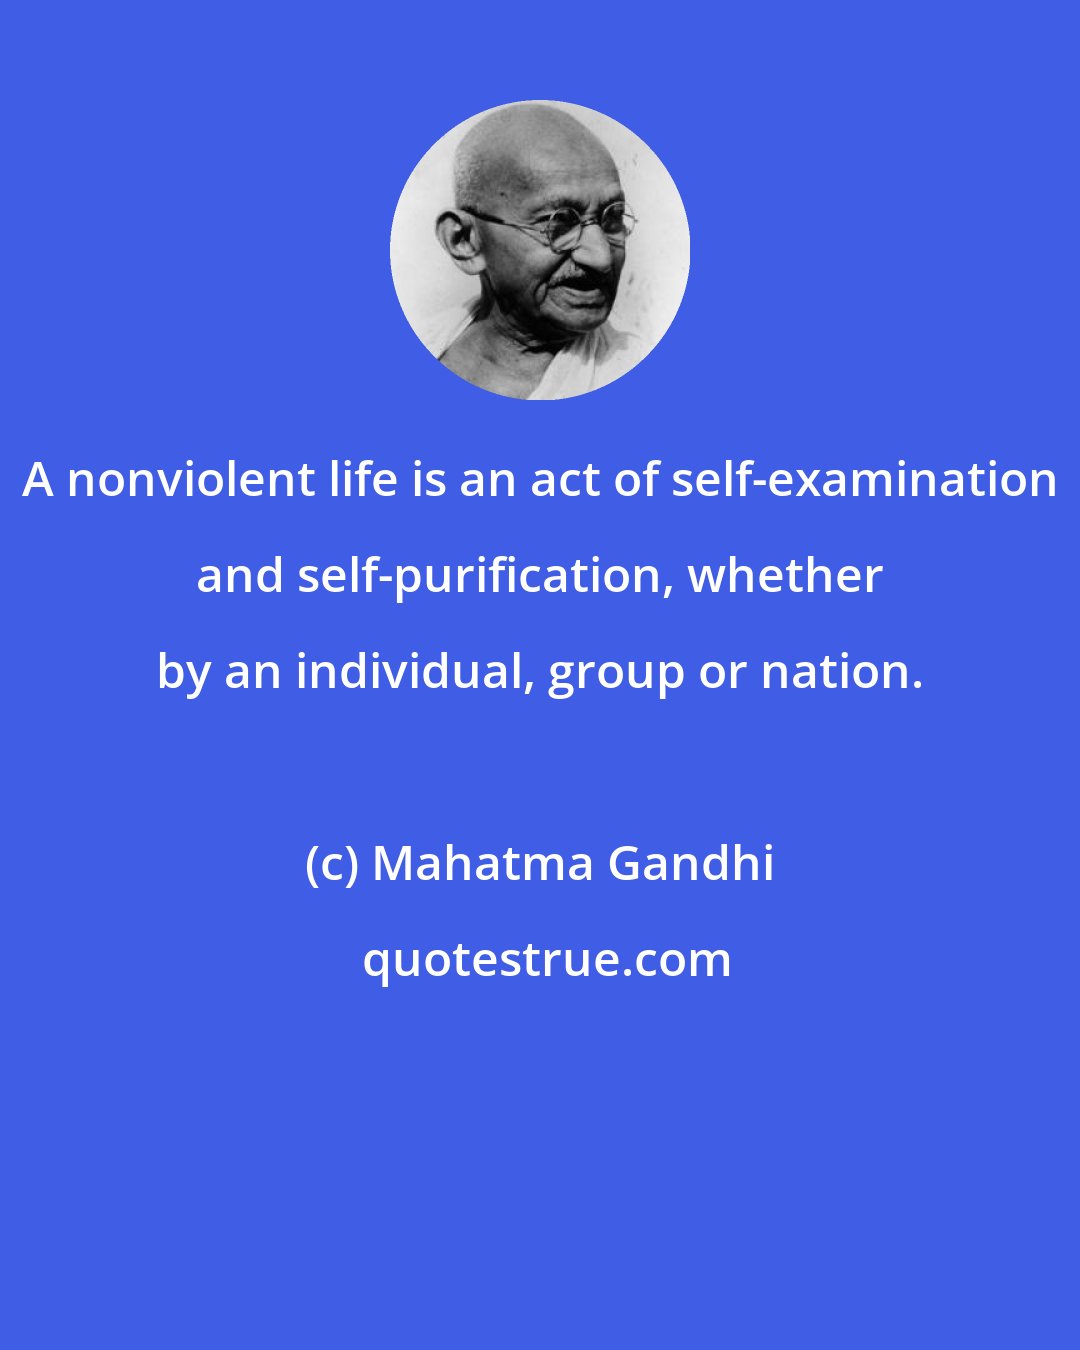 Mahatma Gandhi: A nonviolent life is an act of self-examination and self-purification, whether by an individual, group or nation.